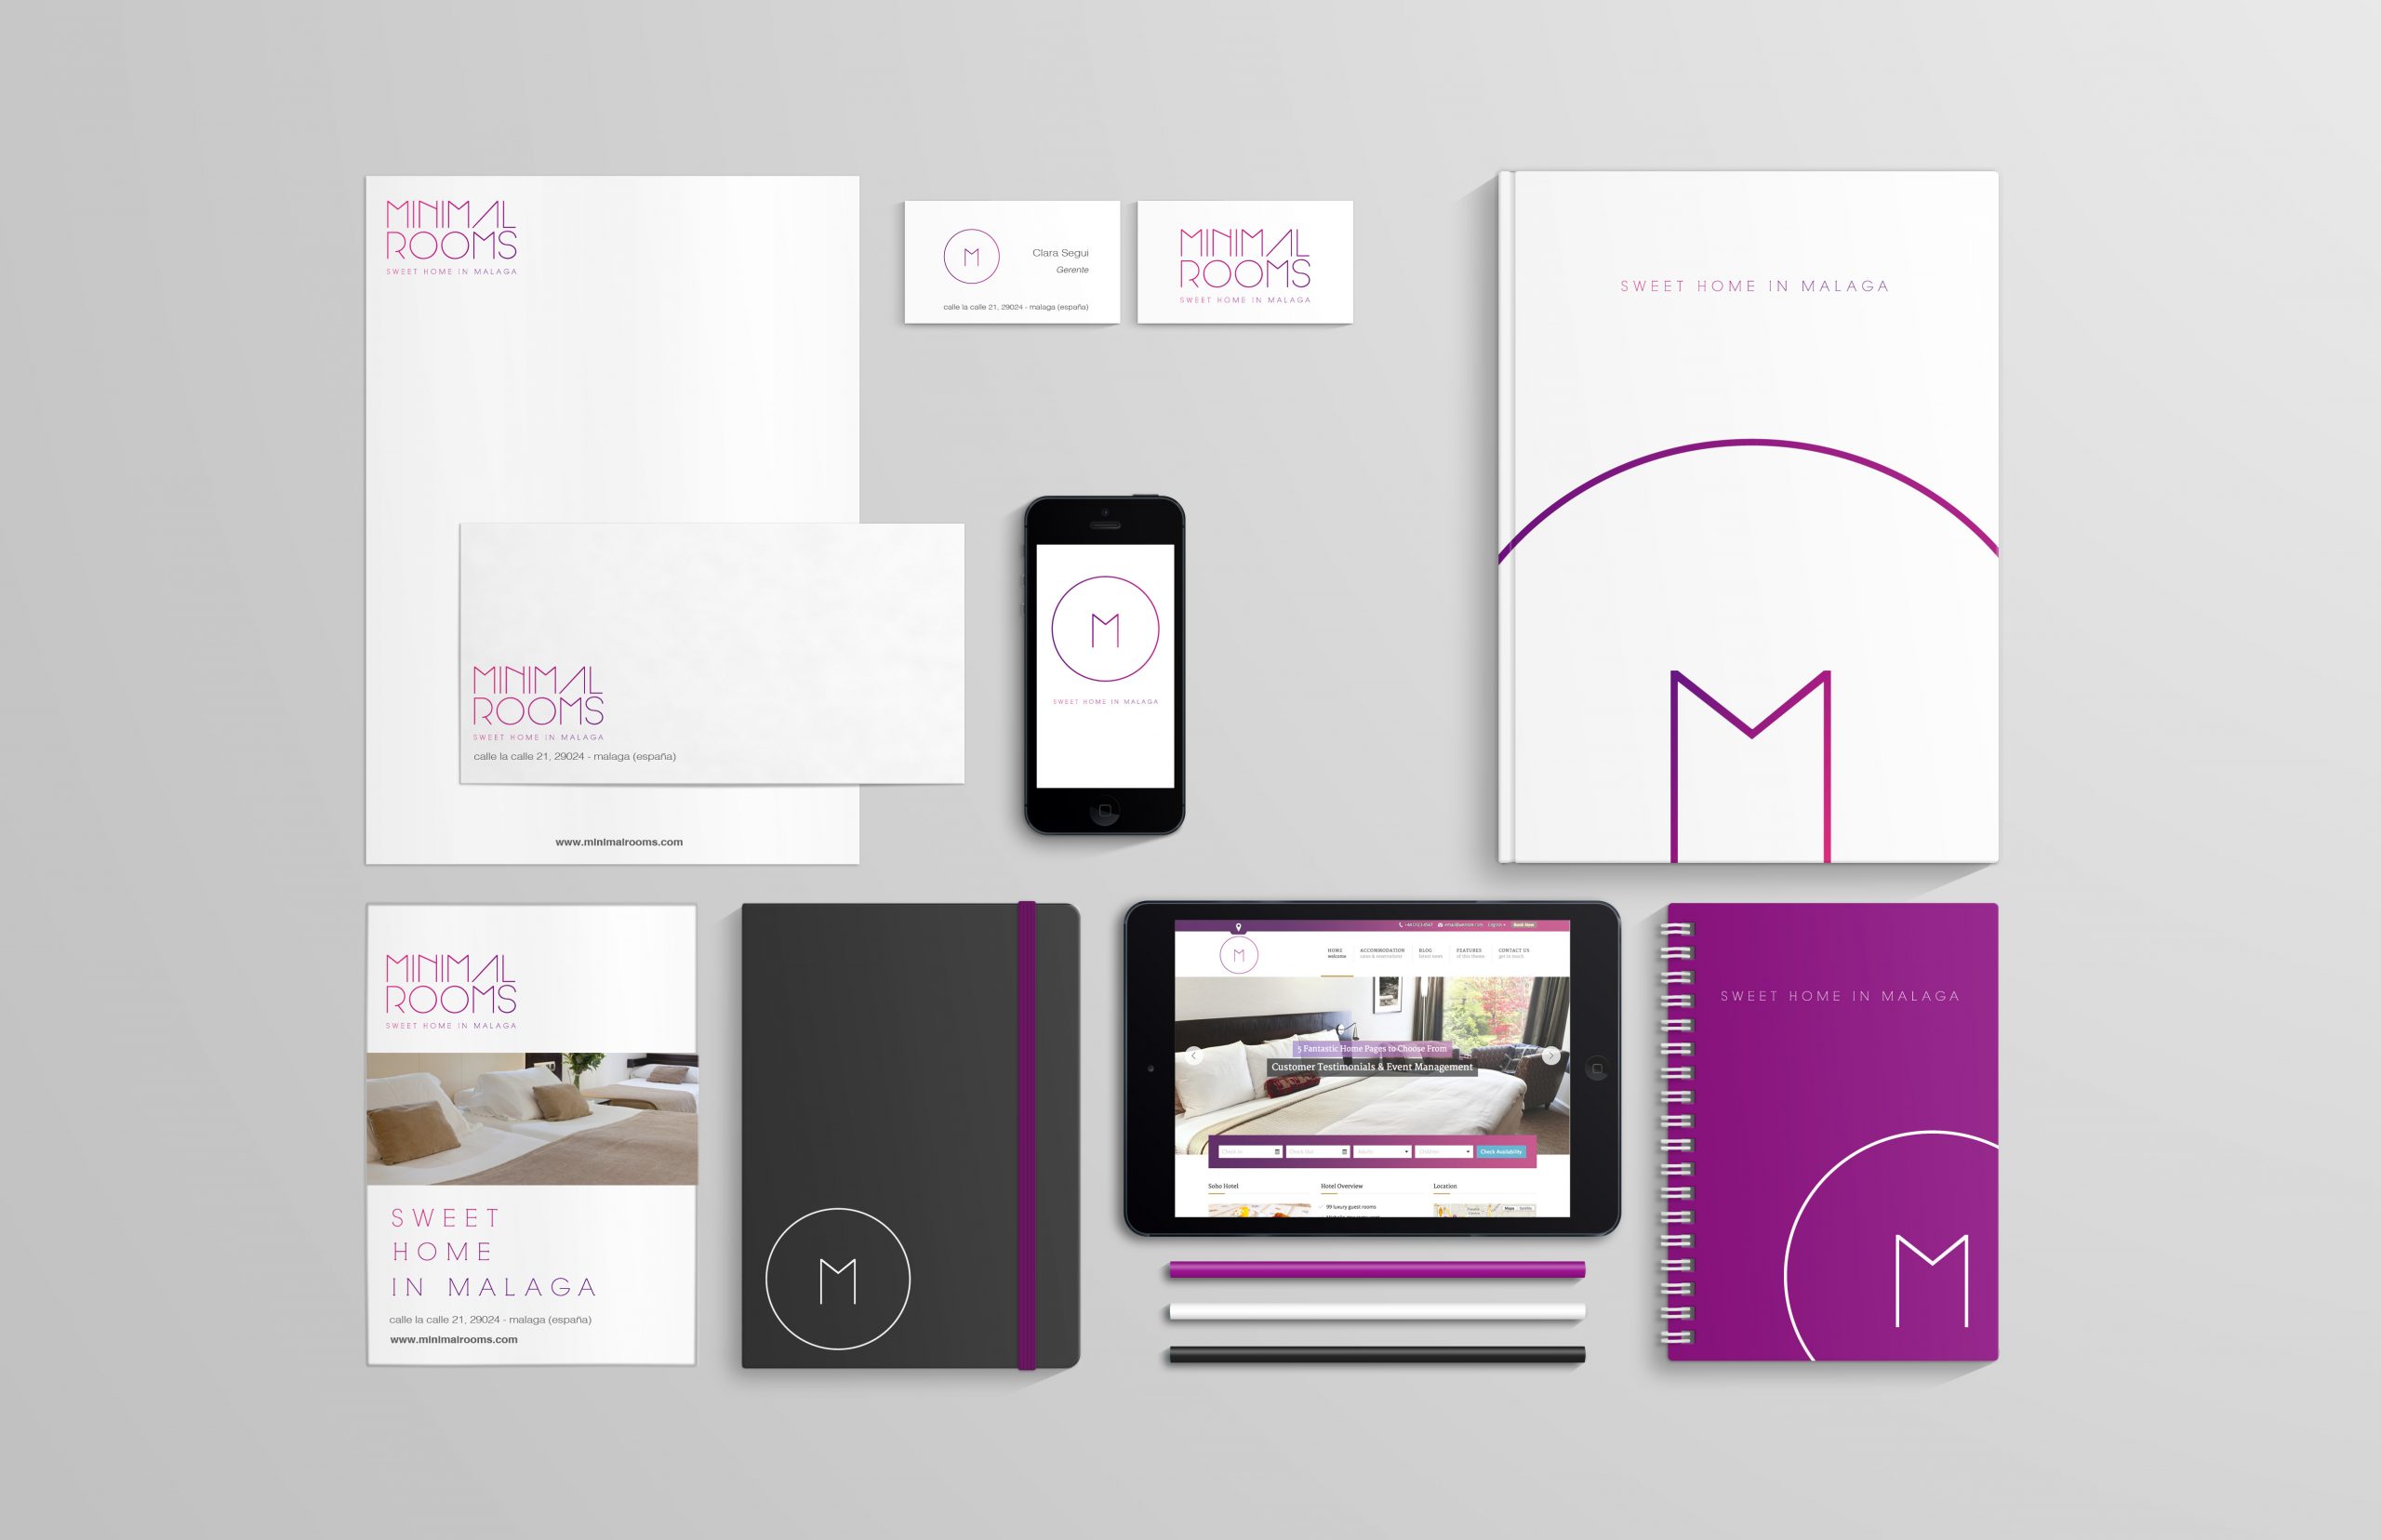 A free stationary branding mock up created by Santiago Moreno.